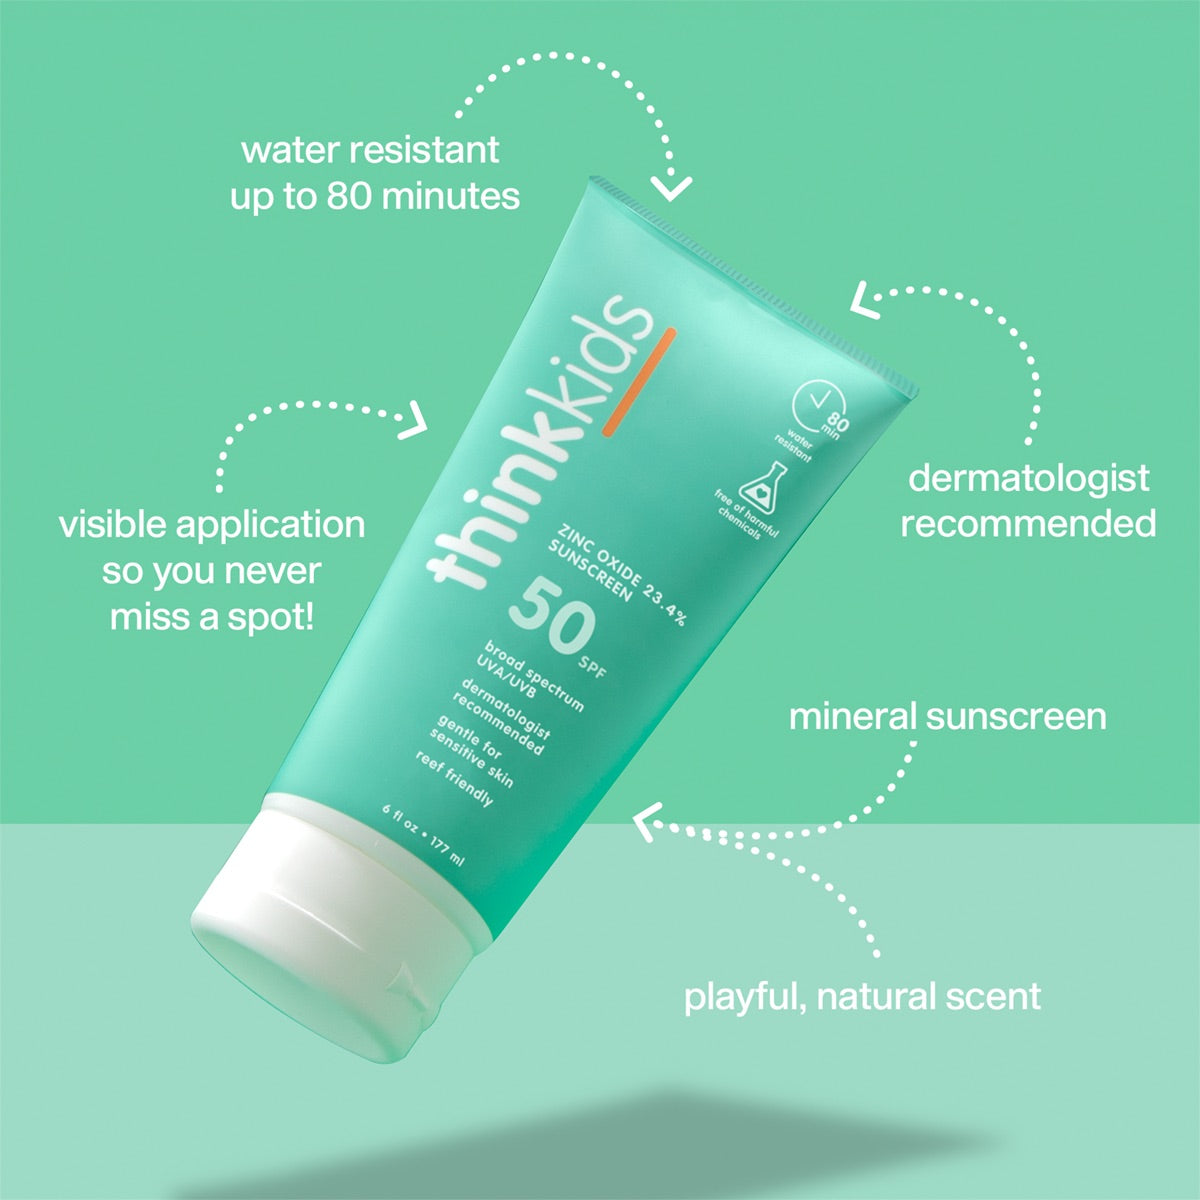 An image of Thinkkids sunscreen emphasizing water resistance, dermatologist recommended, mineral sunscreen, and a playful, natural scent against a teal background.